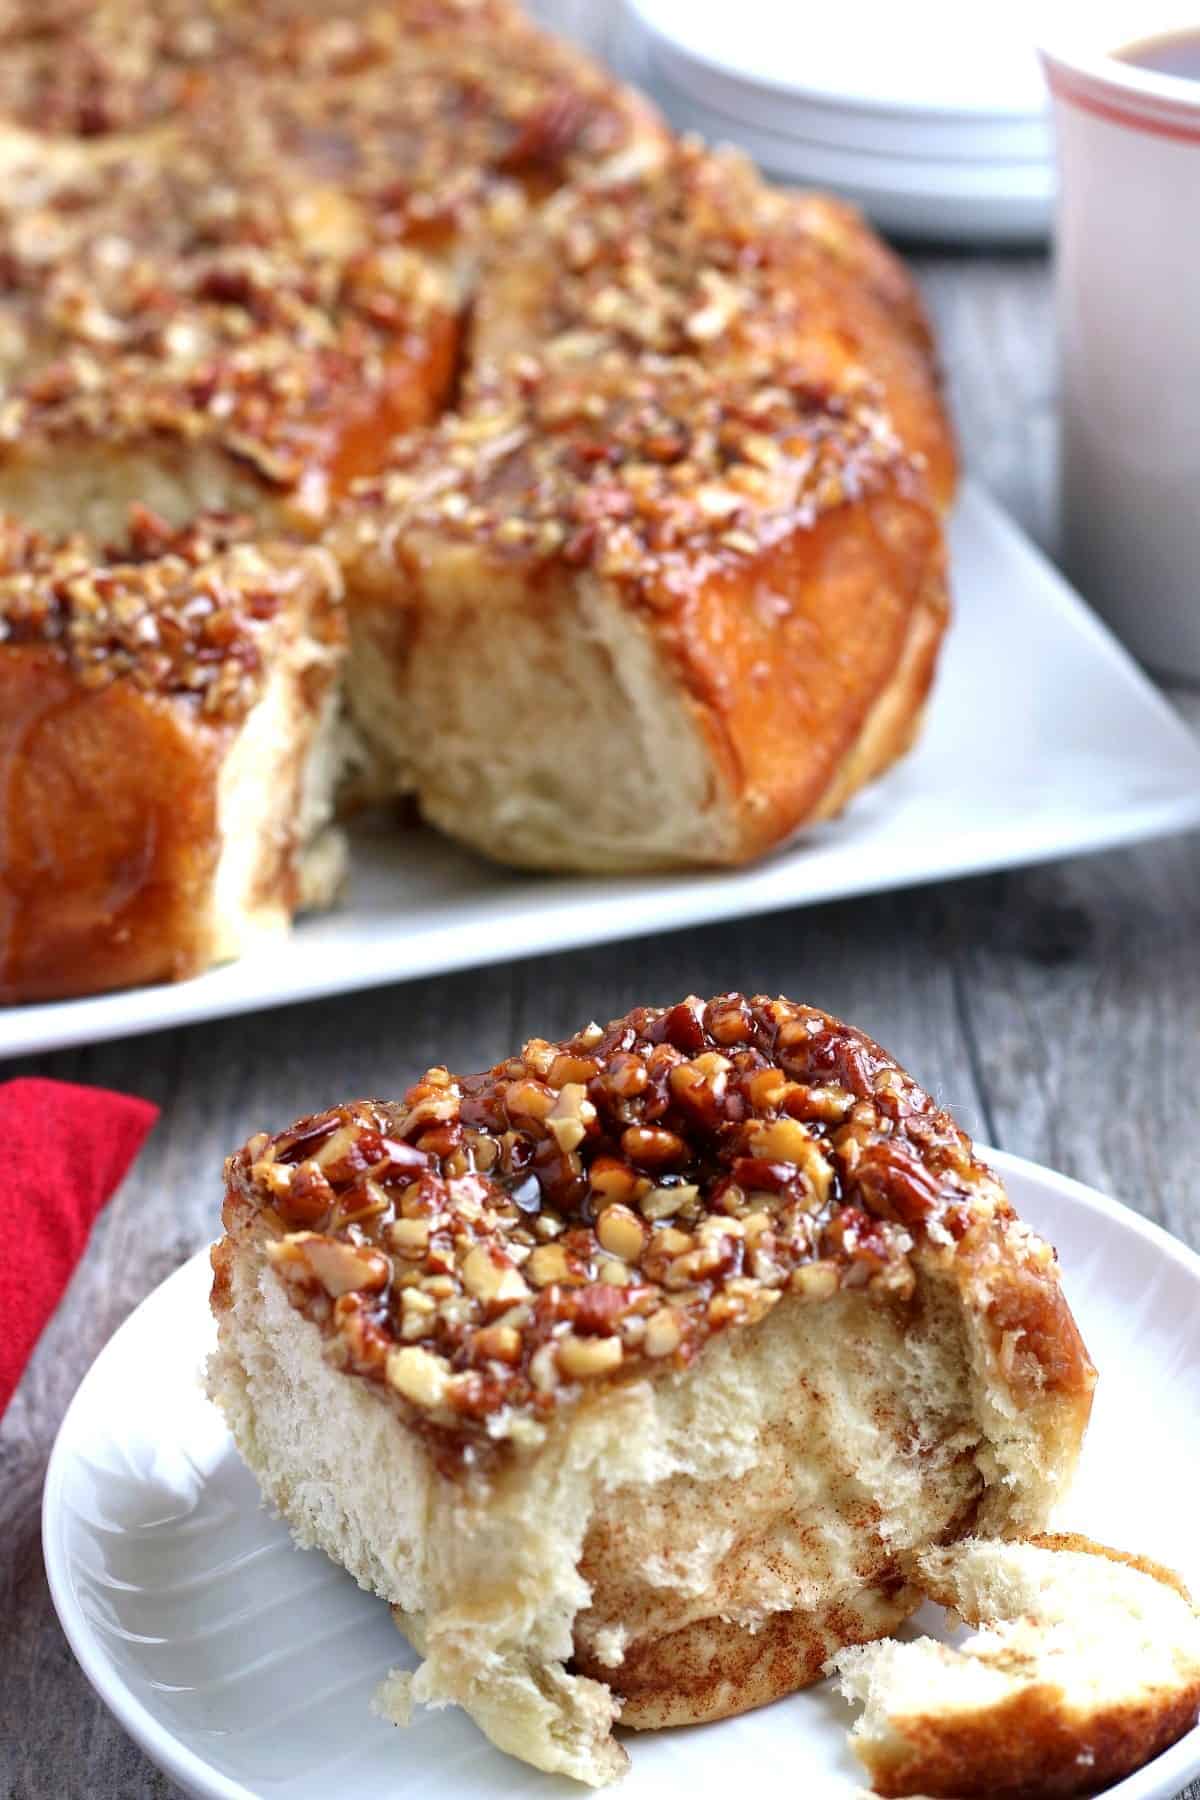 One sticky bun pulled off the full loaf and photographed up close.